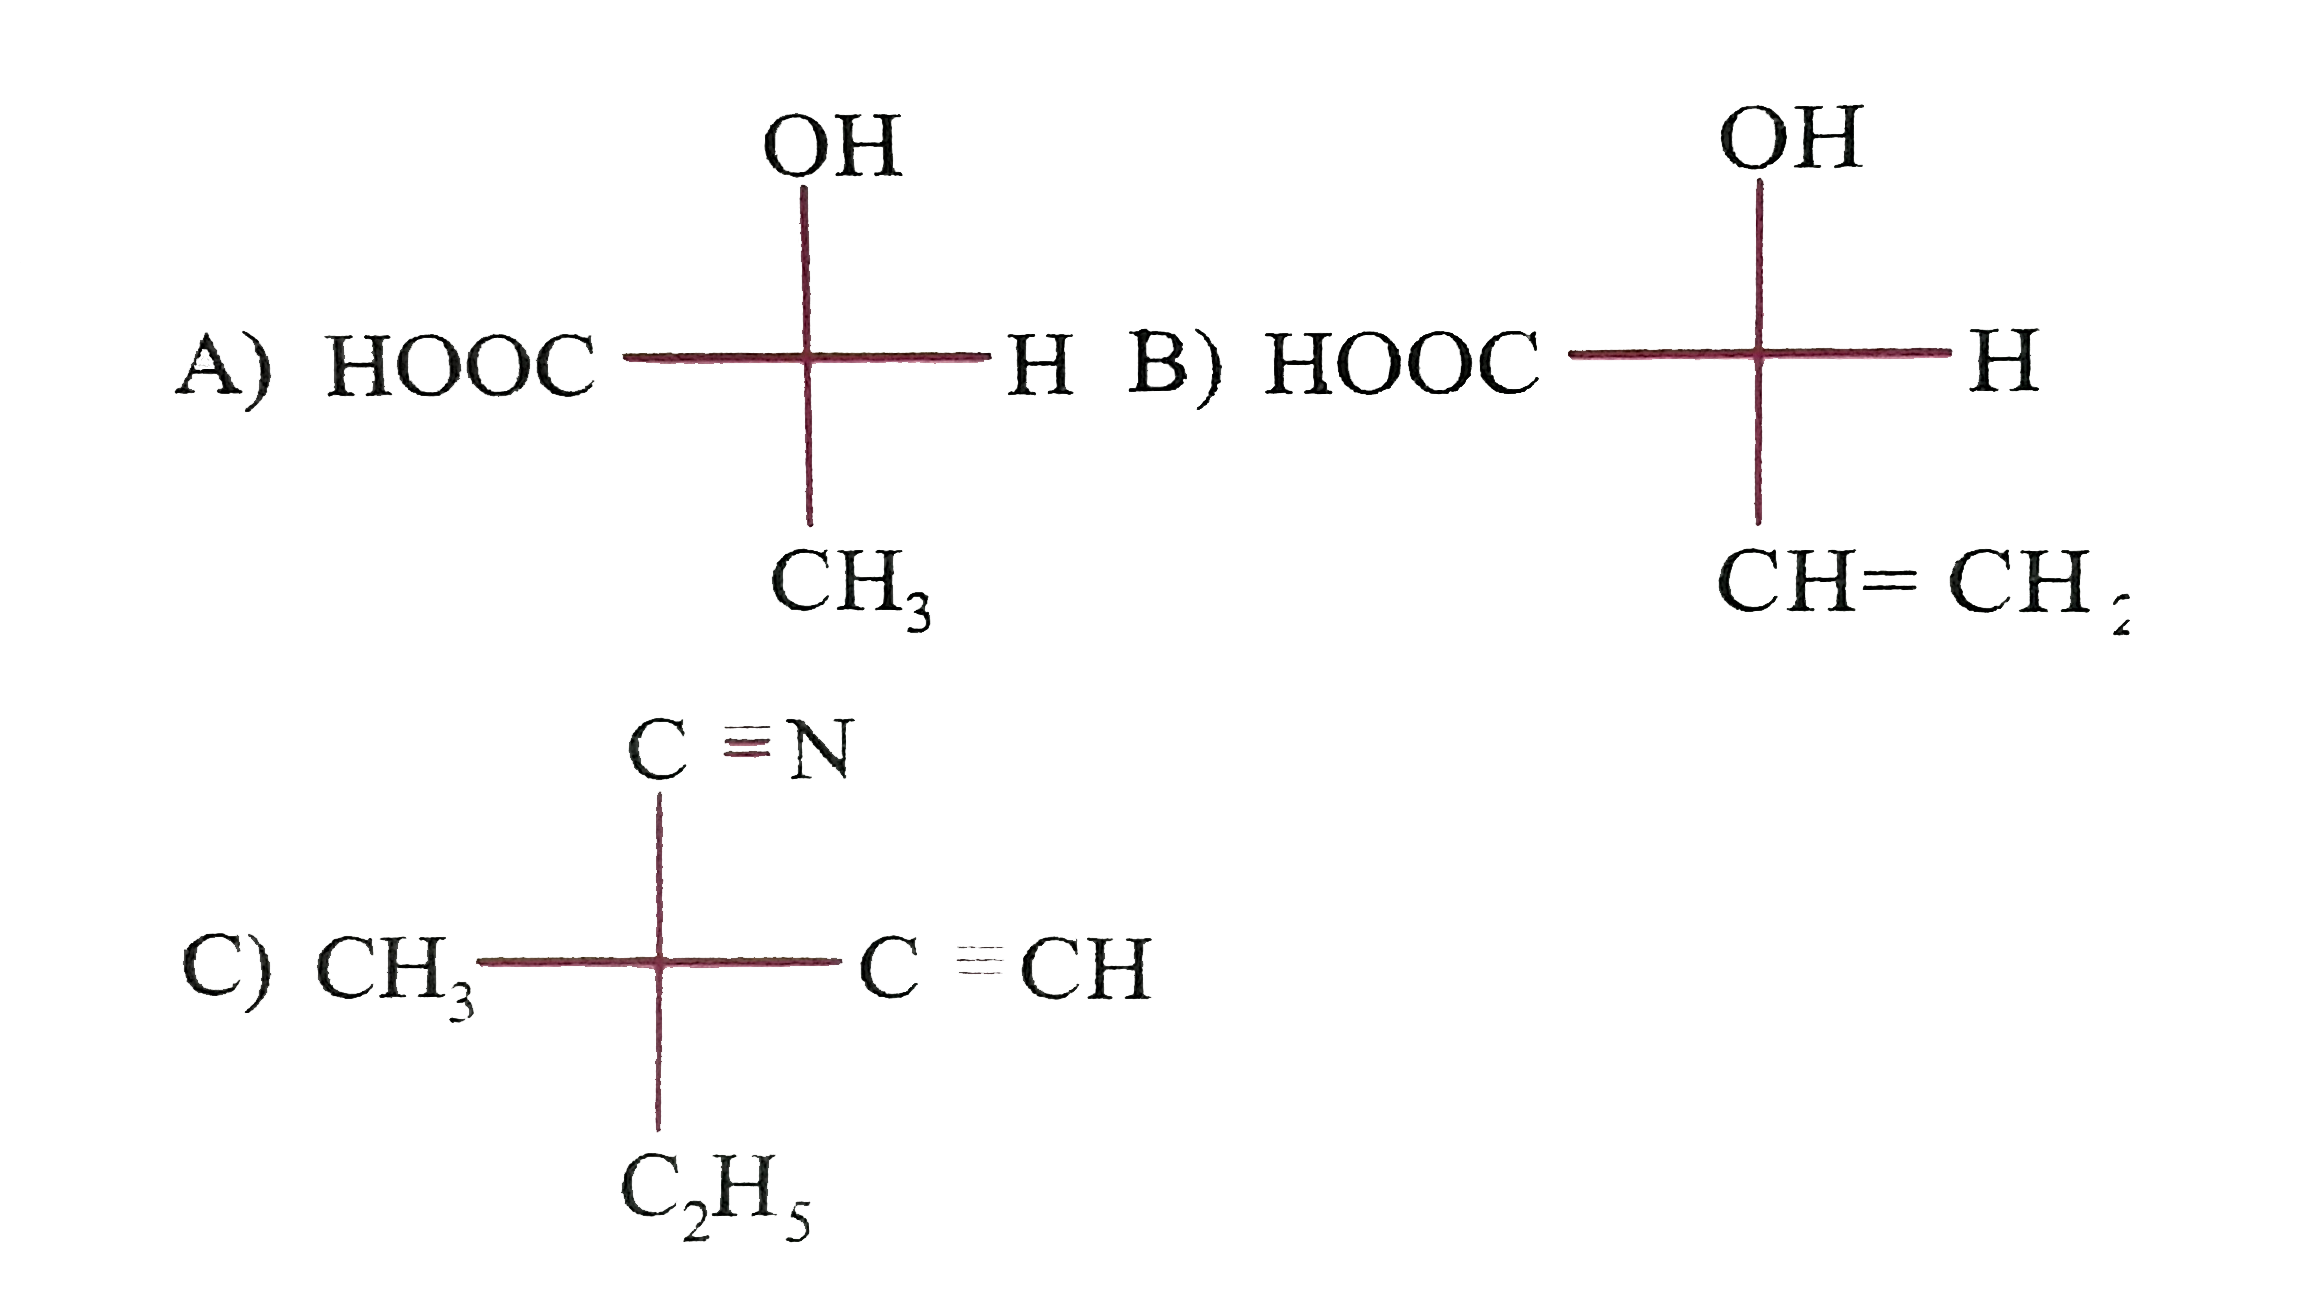 The configurations of the following compounds A,B C in R,S notation are